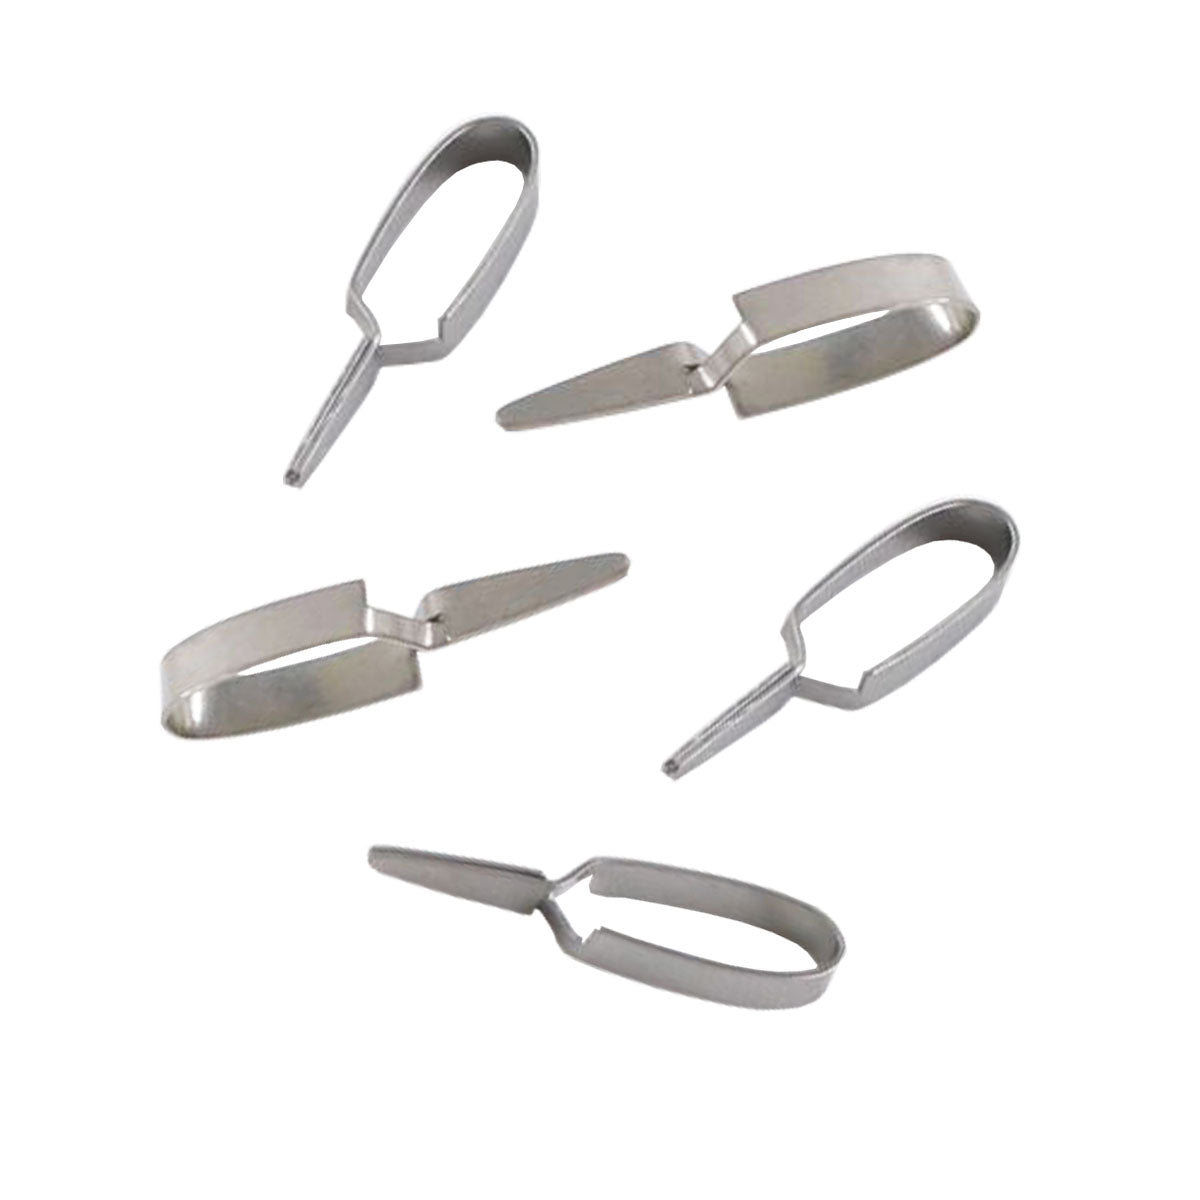 Metal Stainless steel mini clamps for miniature projects model work miniature tools small crafts…